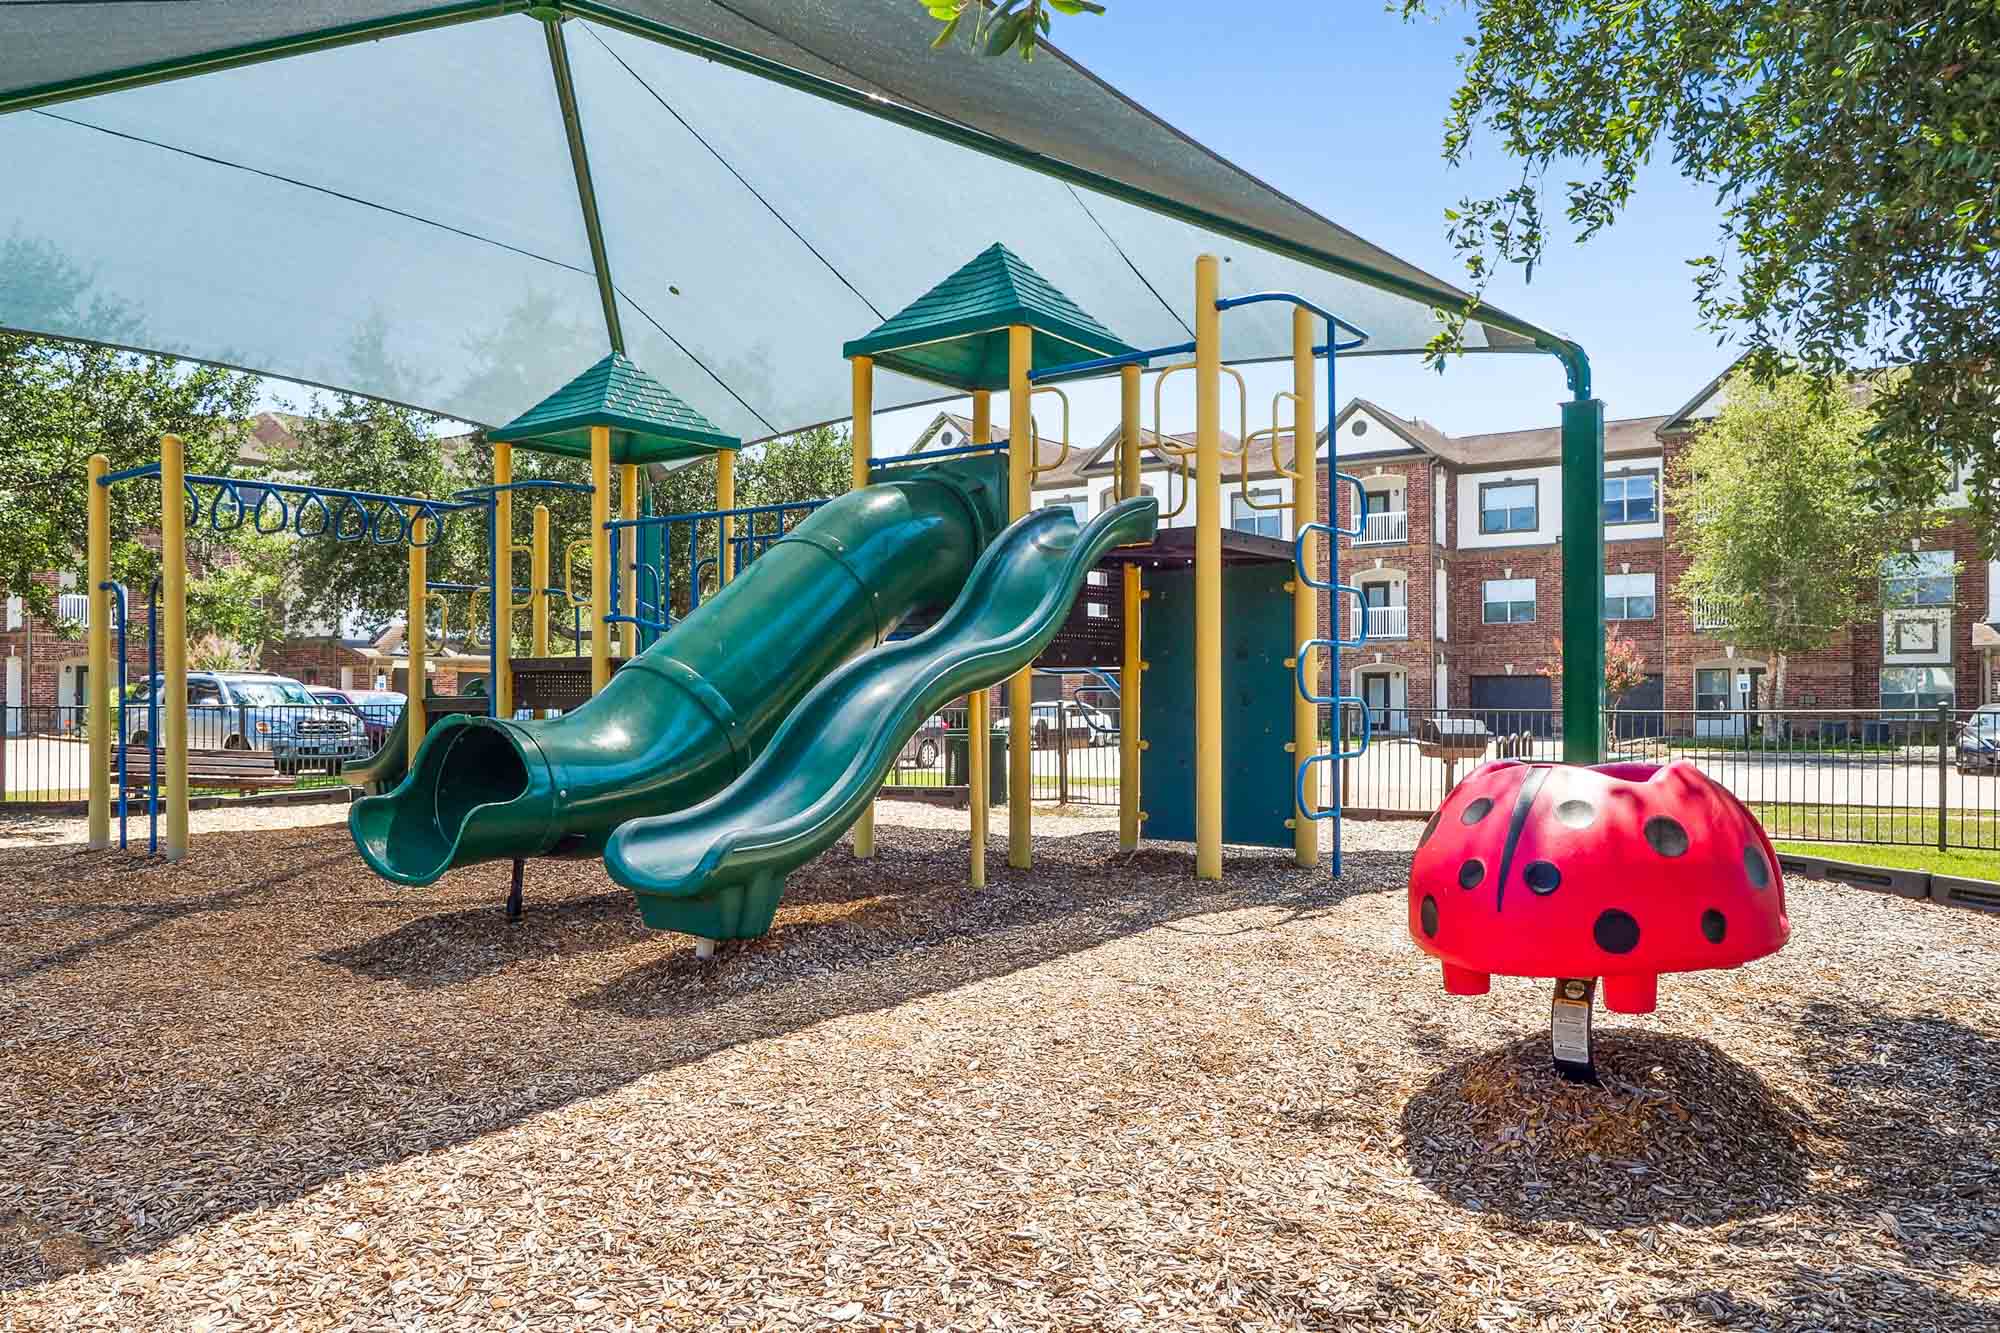 The playground at The Villas at Shadow Creek apartments in Houston, TX.